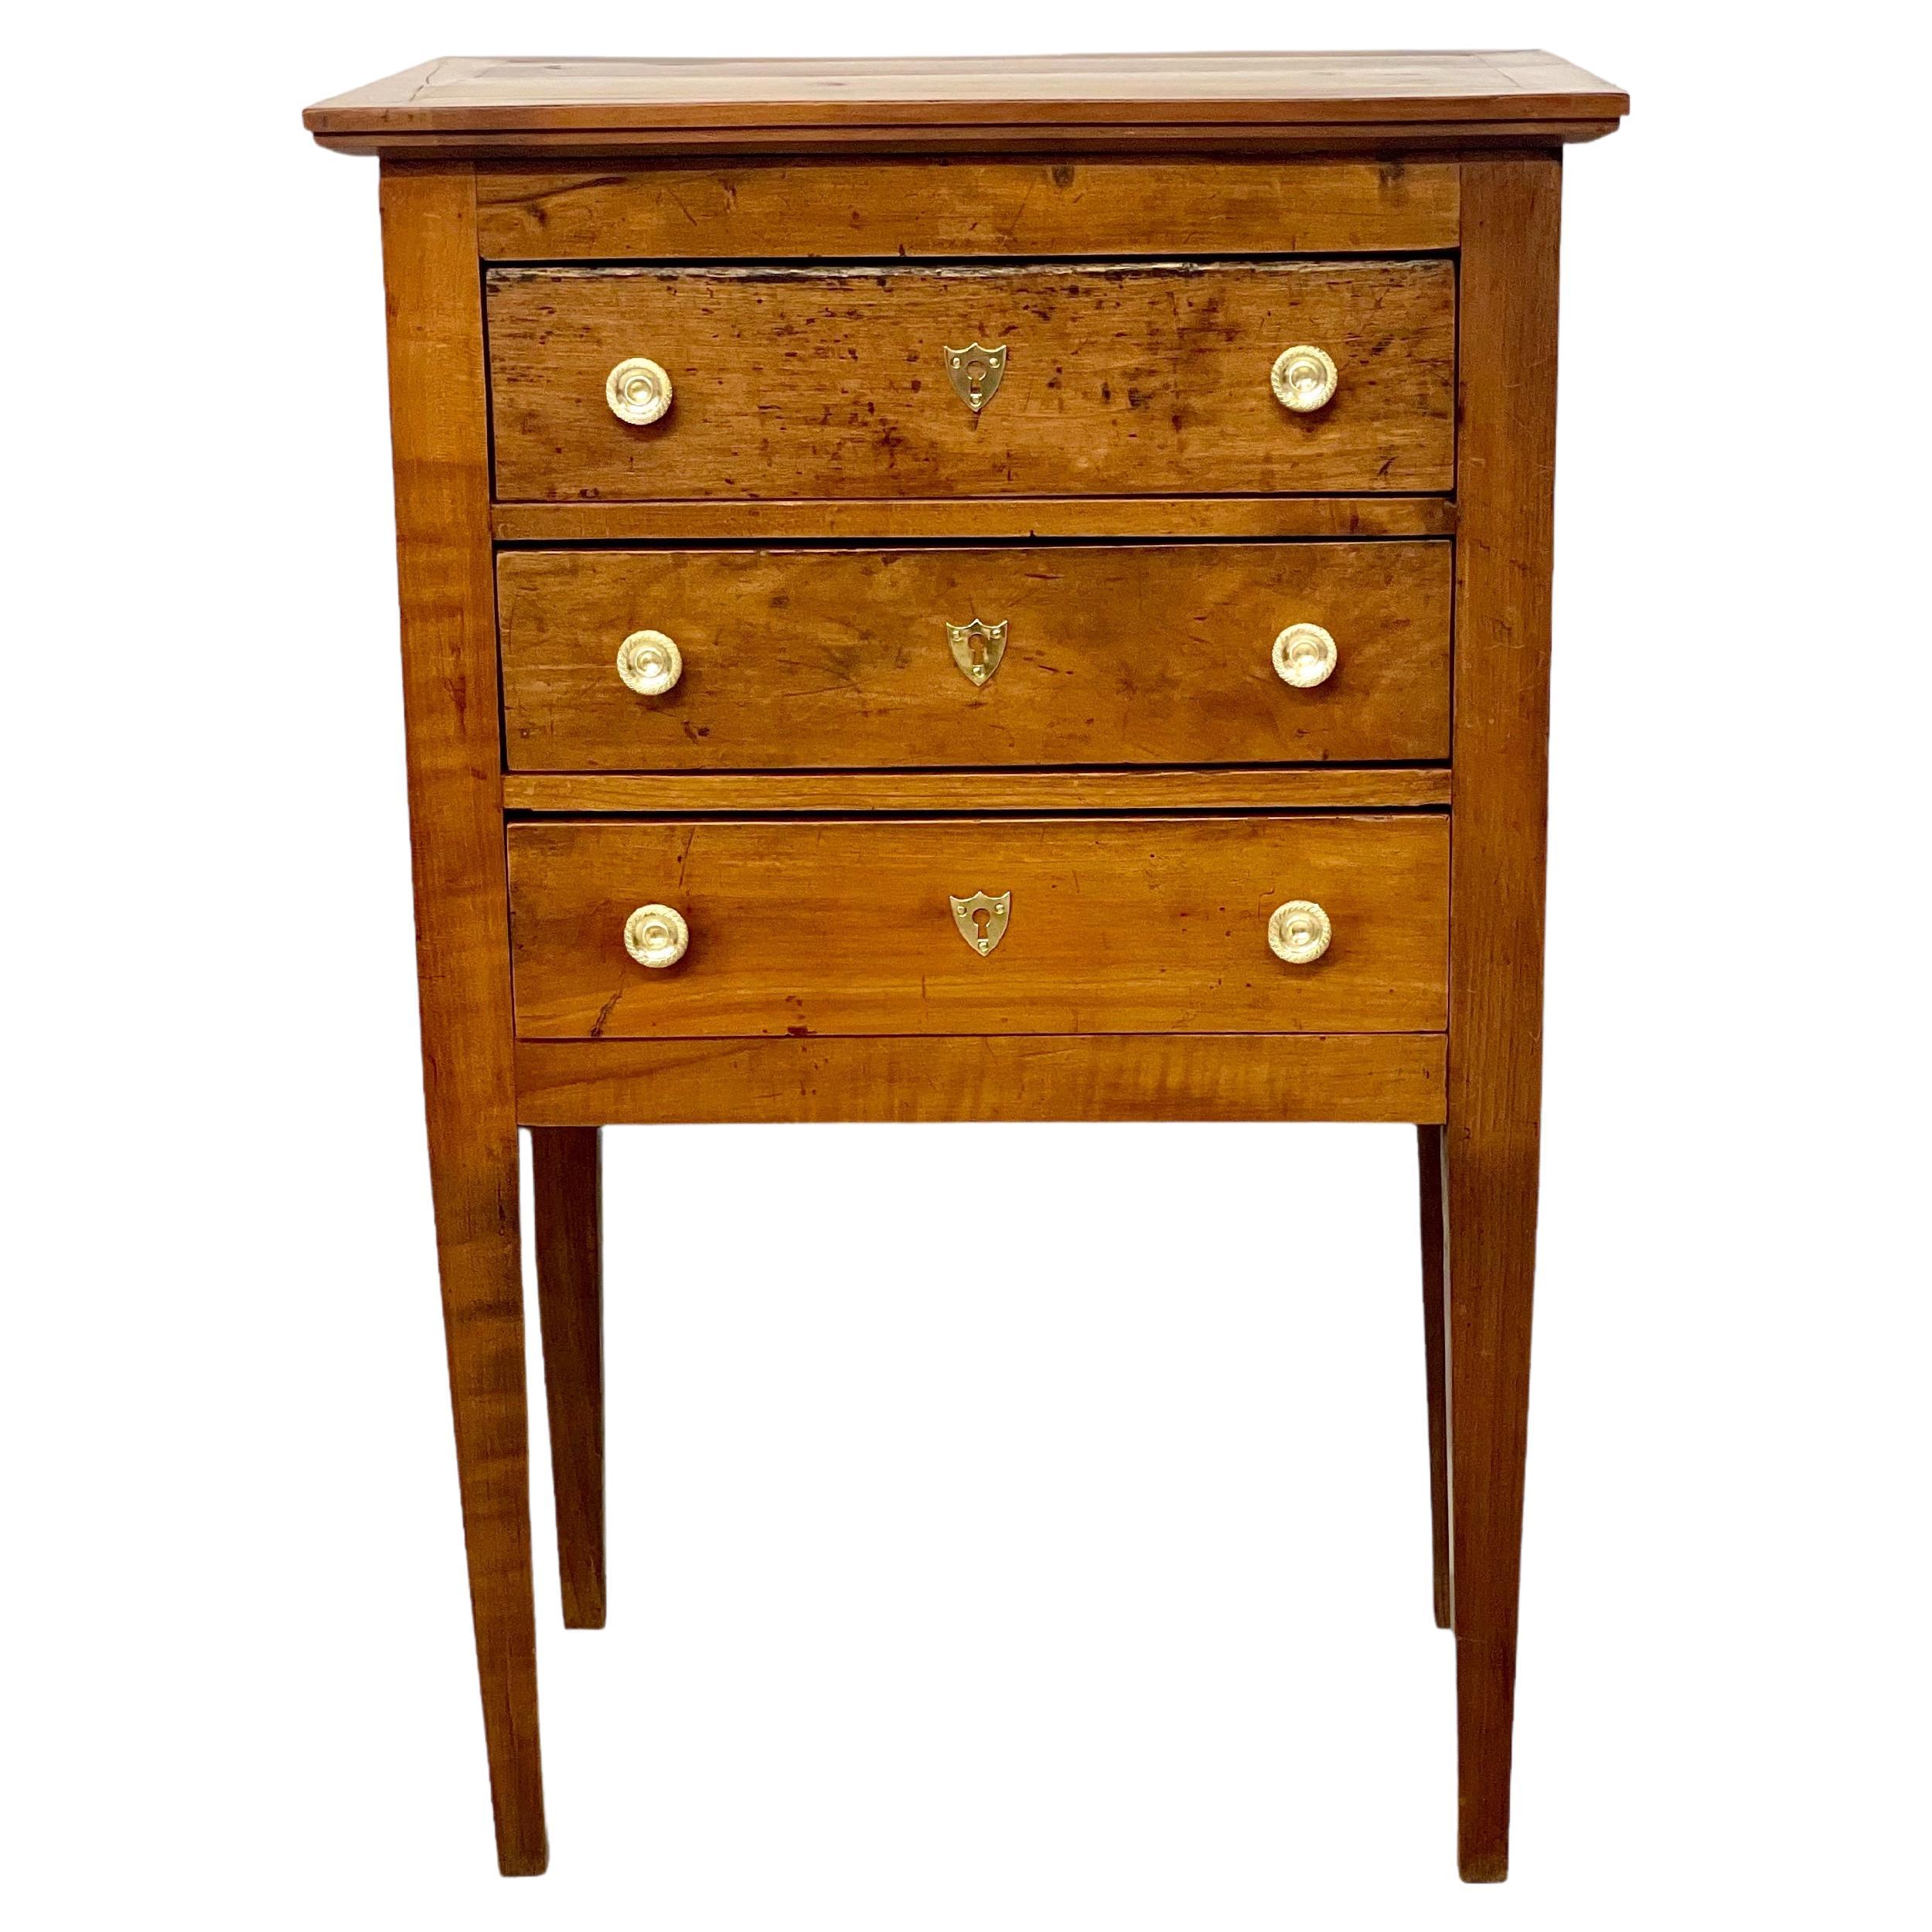 19th Century French Walnut Chest of Drawers or 'Chiffonnier'